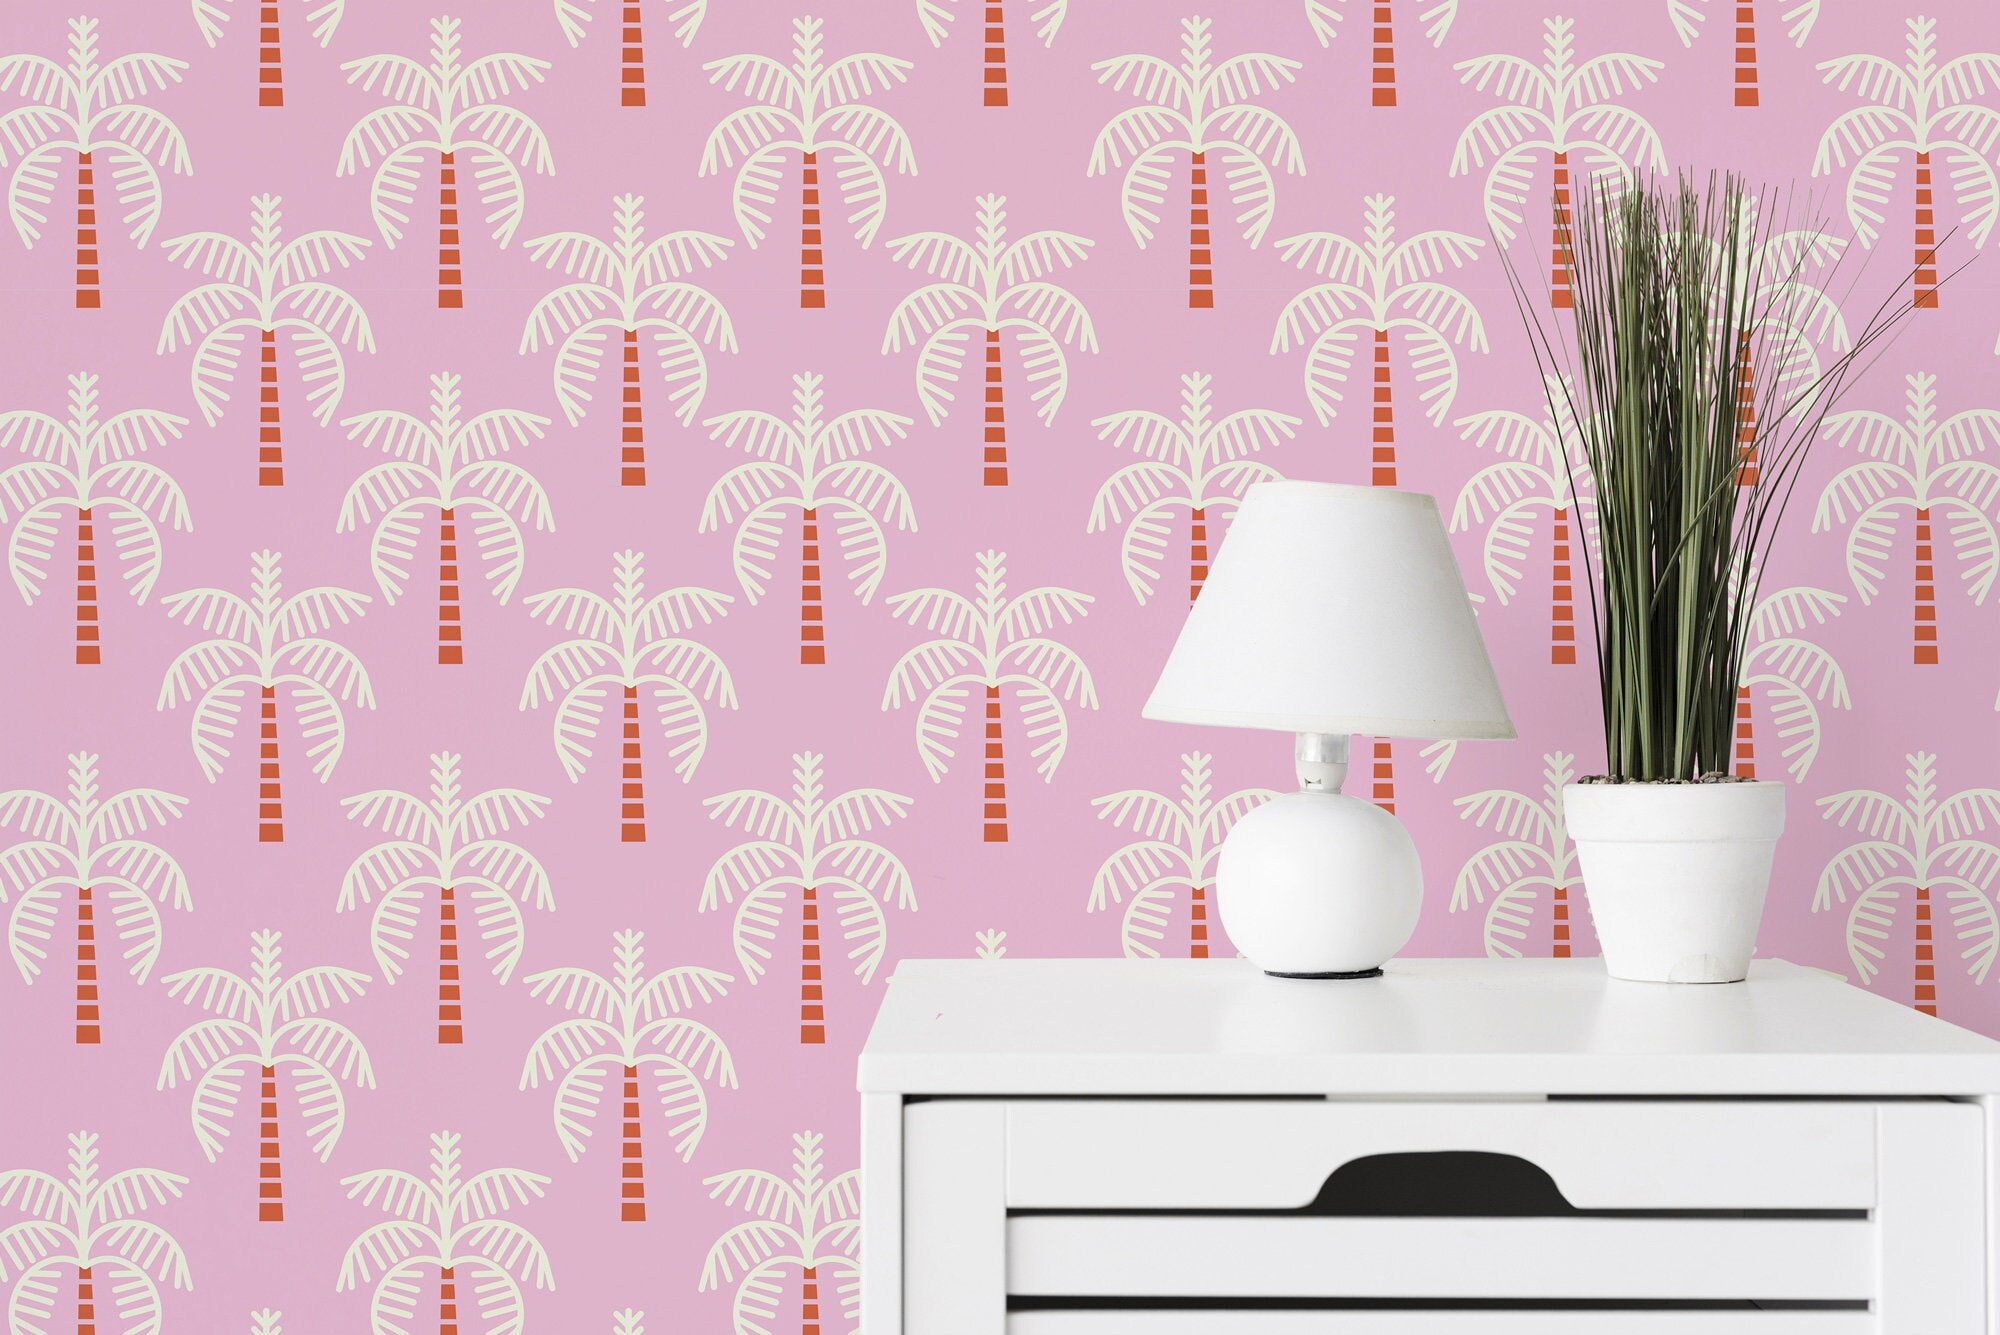 Pink Palm Tree Removable Wallpaper / Self-adhesive or pic